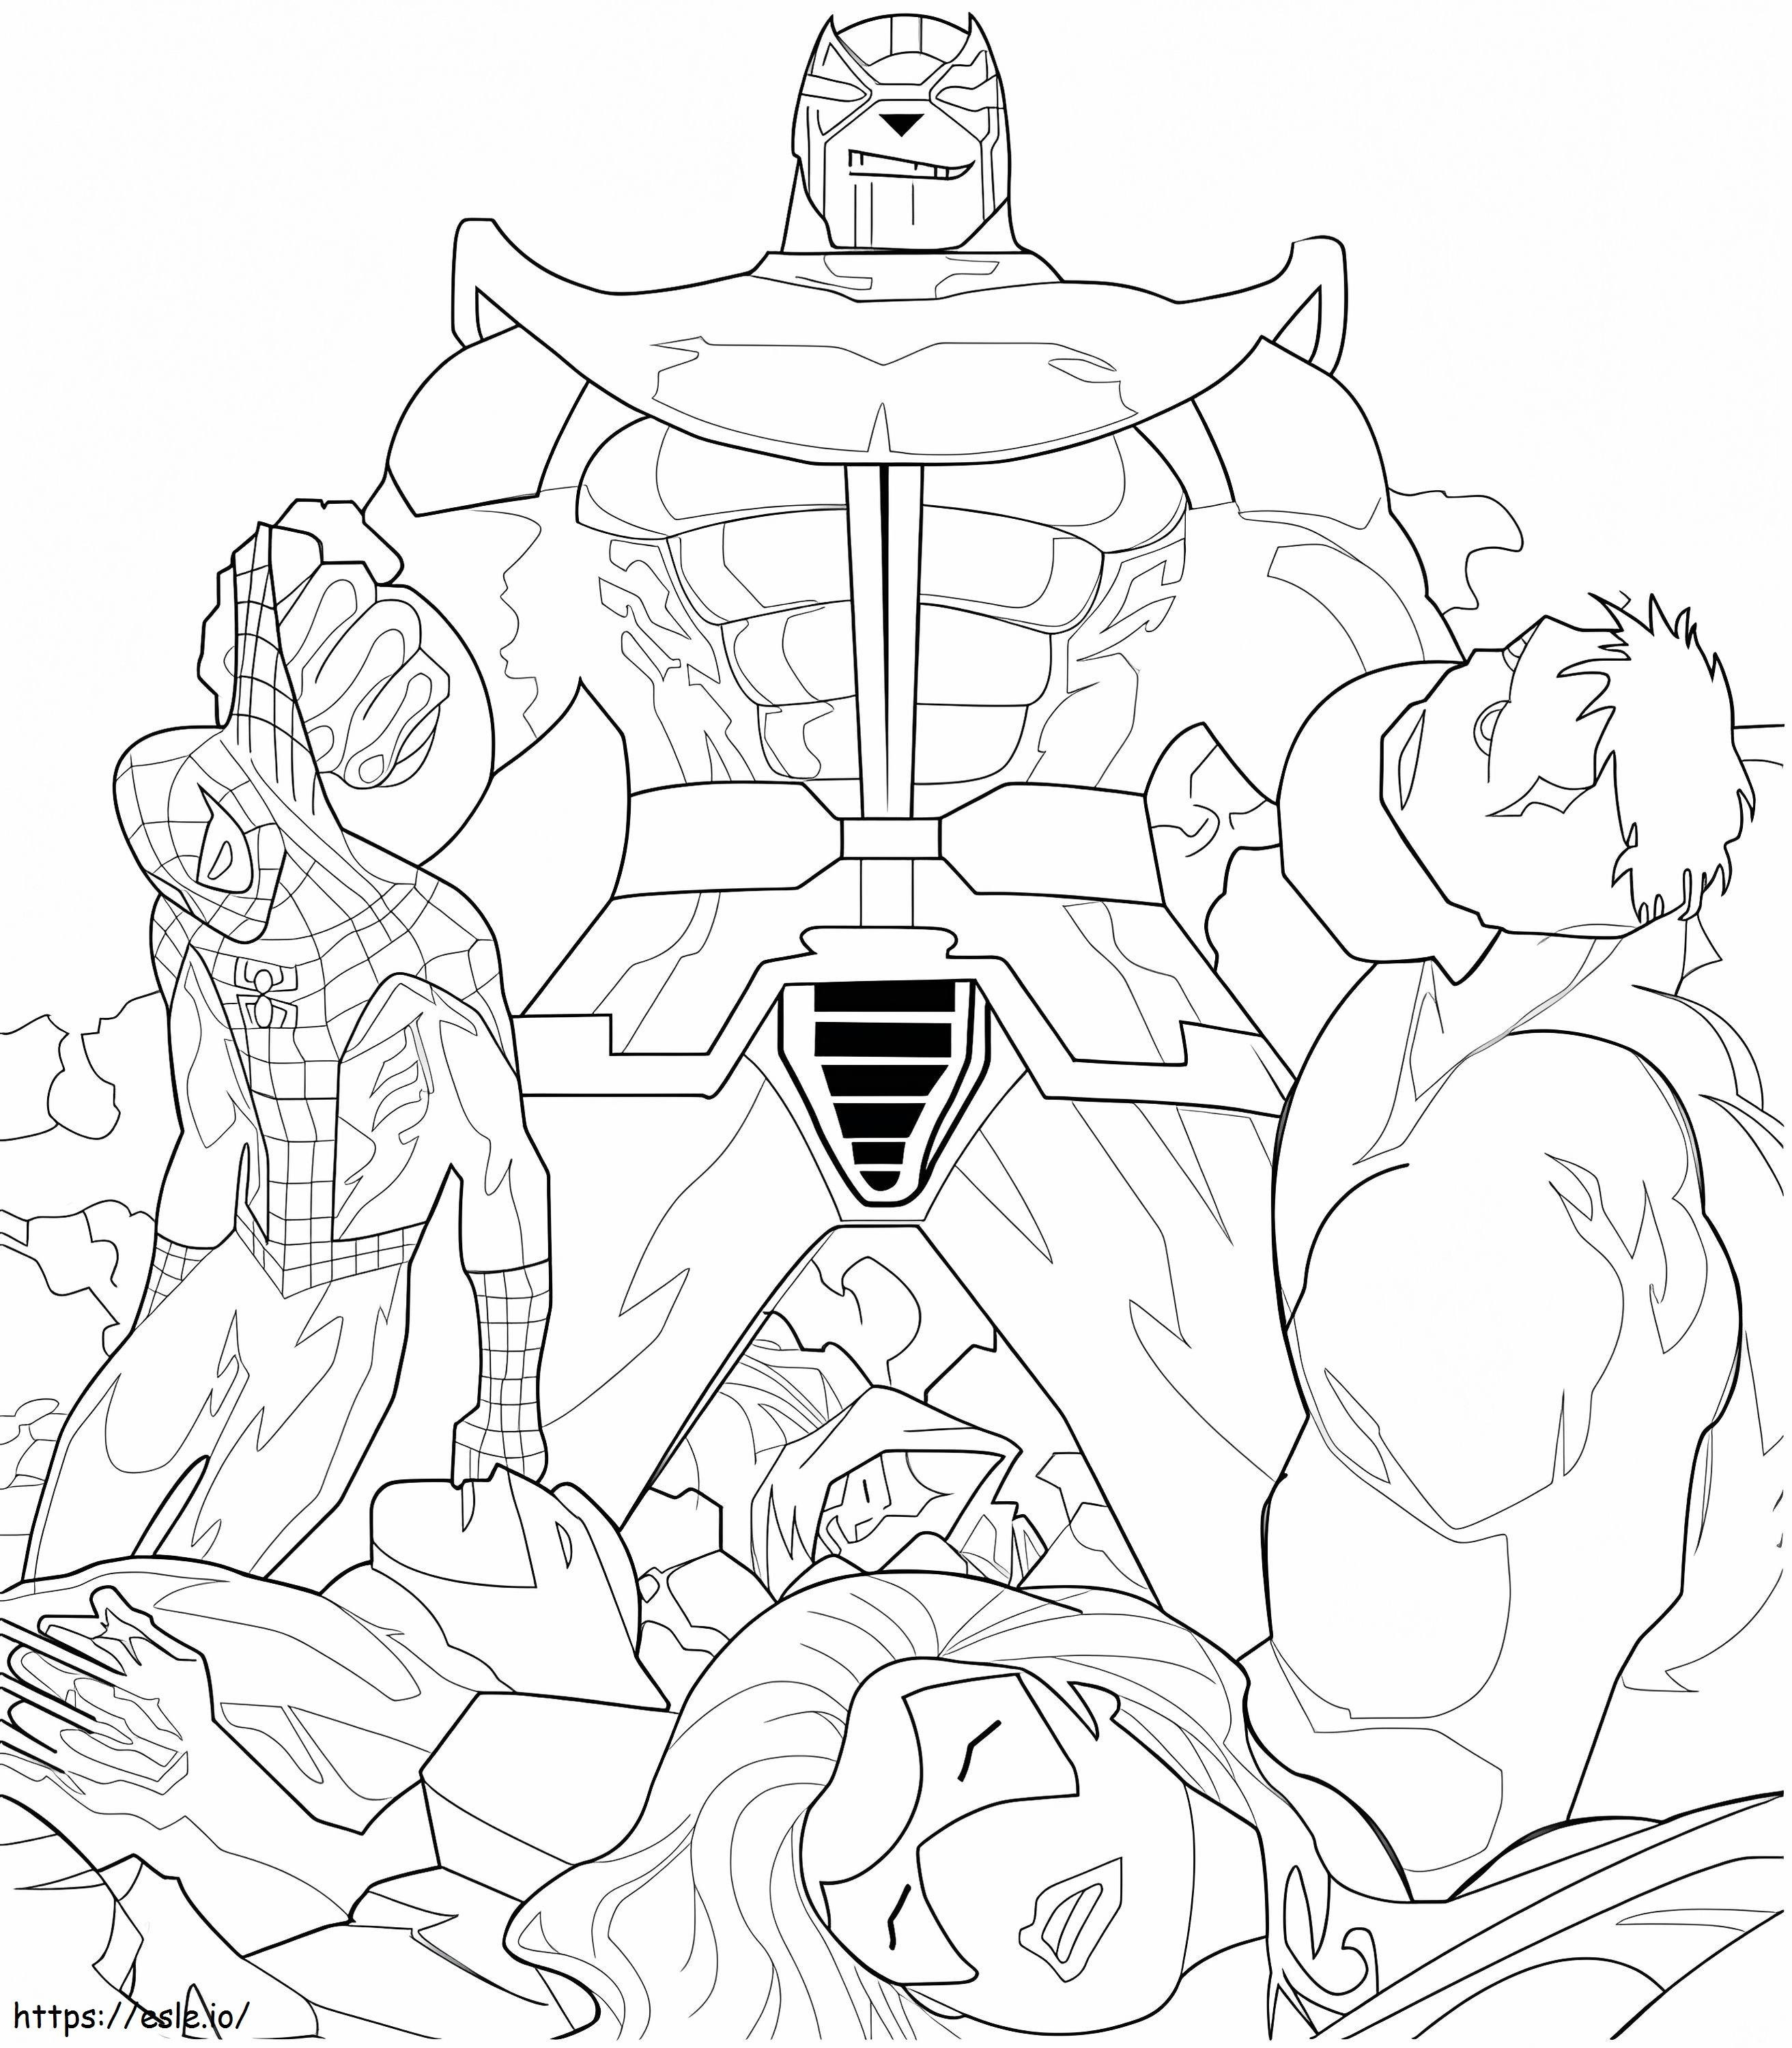 Thanos Vs Avengers coloring page